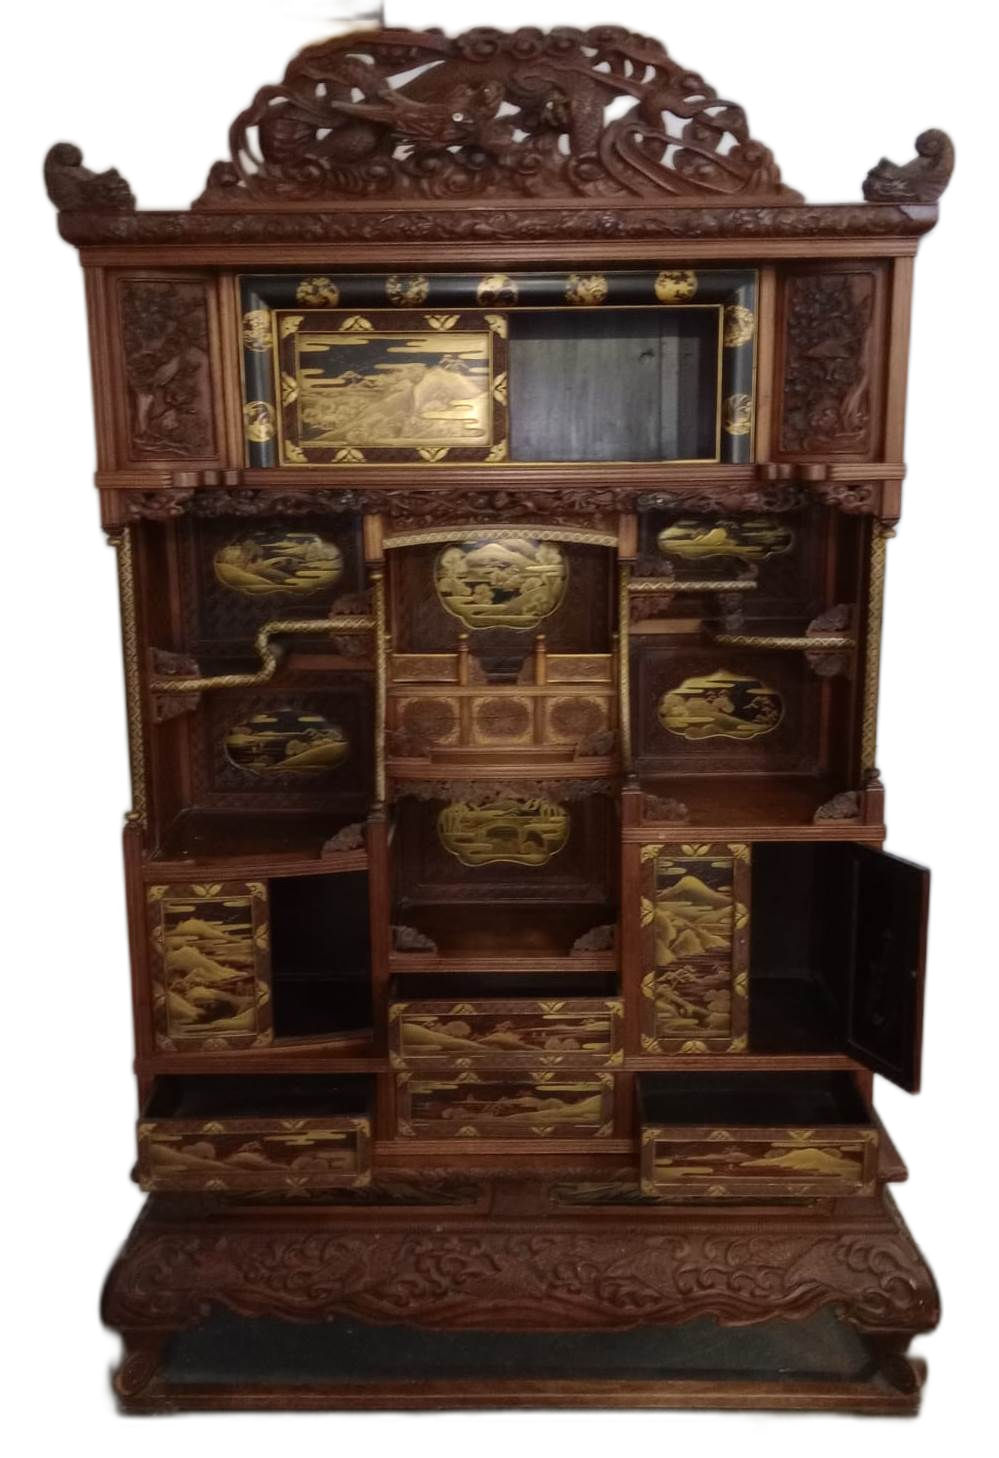 LATE 19TH CENTURY JAPANESE MEIJI LACQUER BOOKCASE CABINET - Image 6 of 10